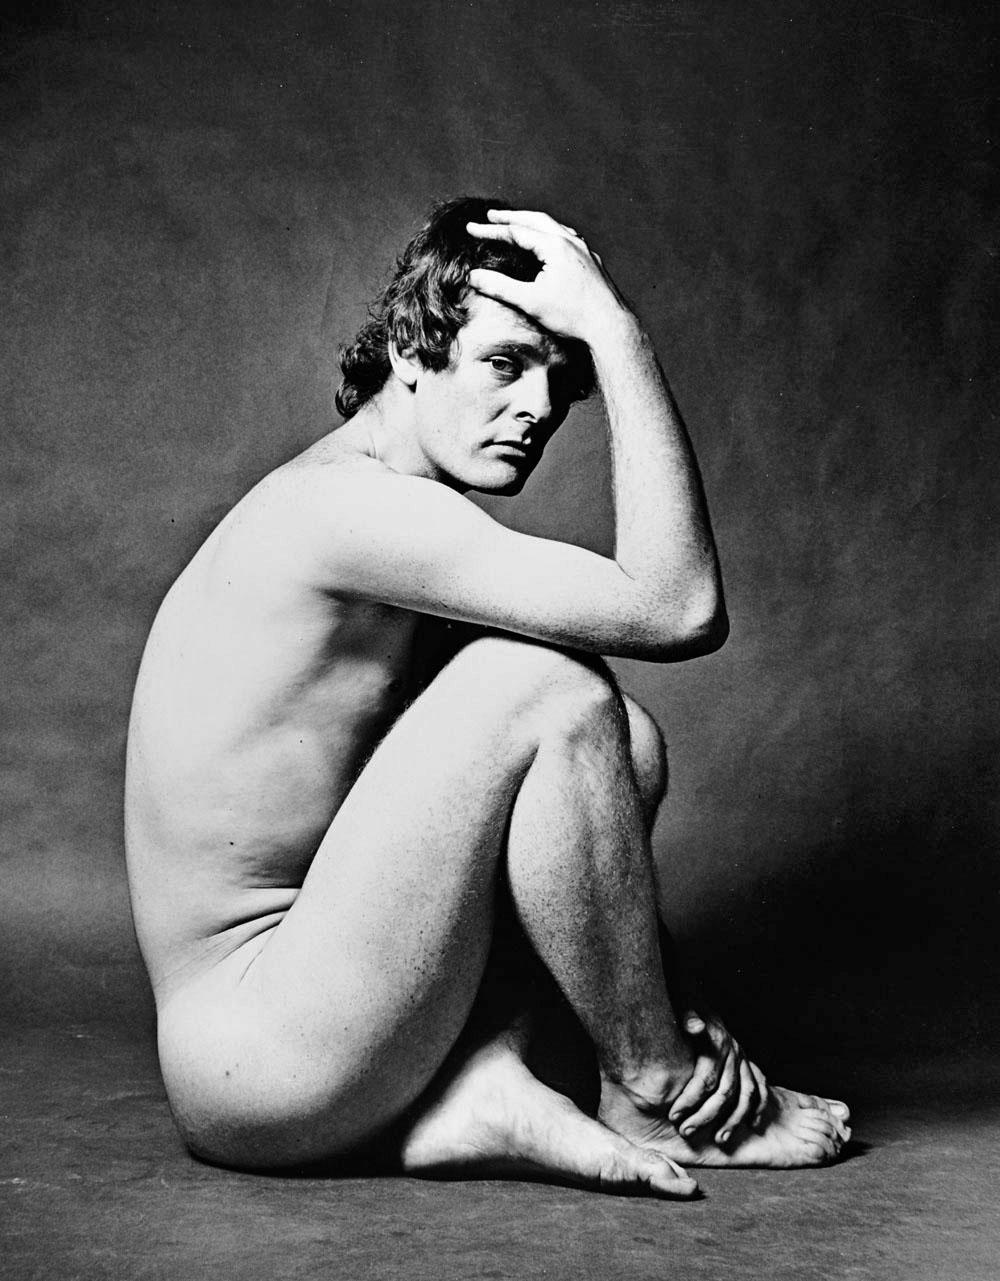 Jack Mitchell Black and White Photograph -  Andy Warhol Films director Paul Morrissey photographed nude for Vanity Fair